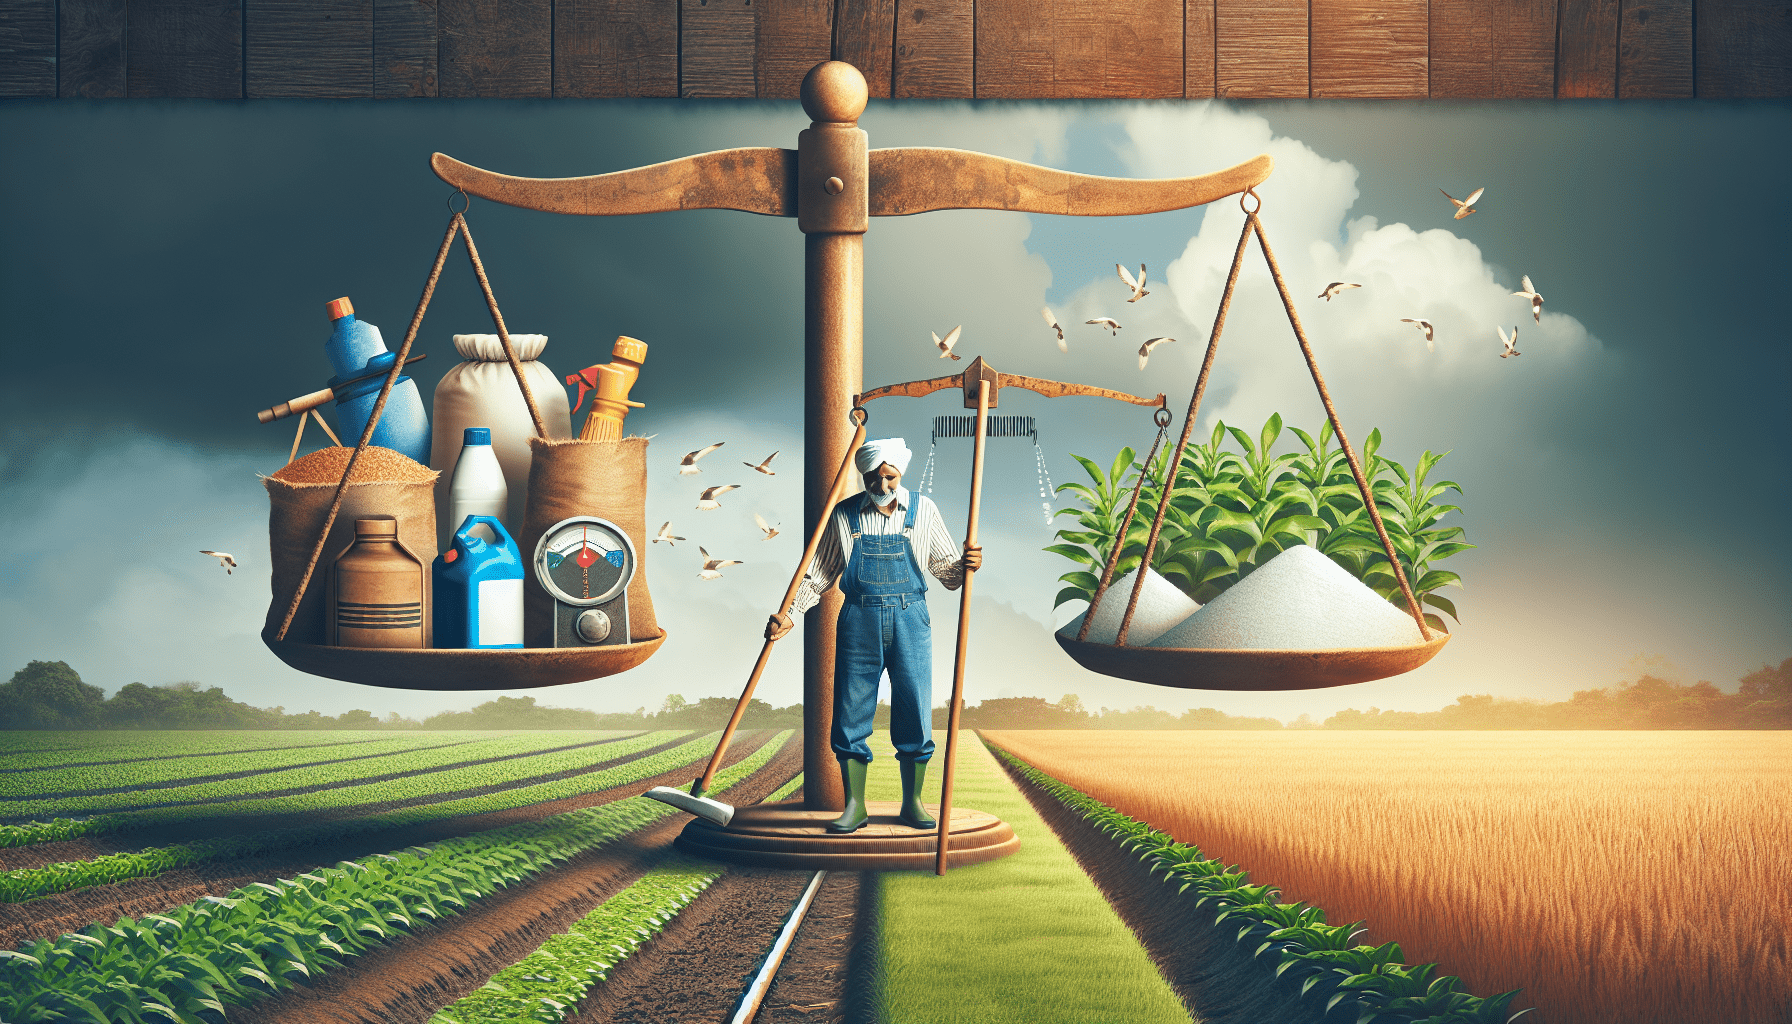 Popular Myths About Fertilizers And Pesticides Debunked